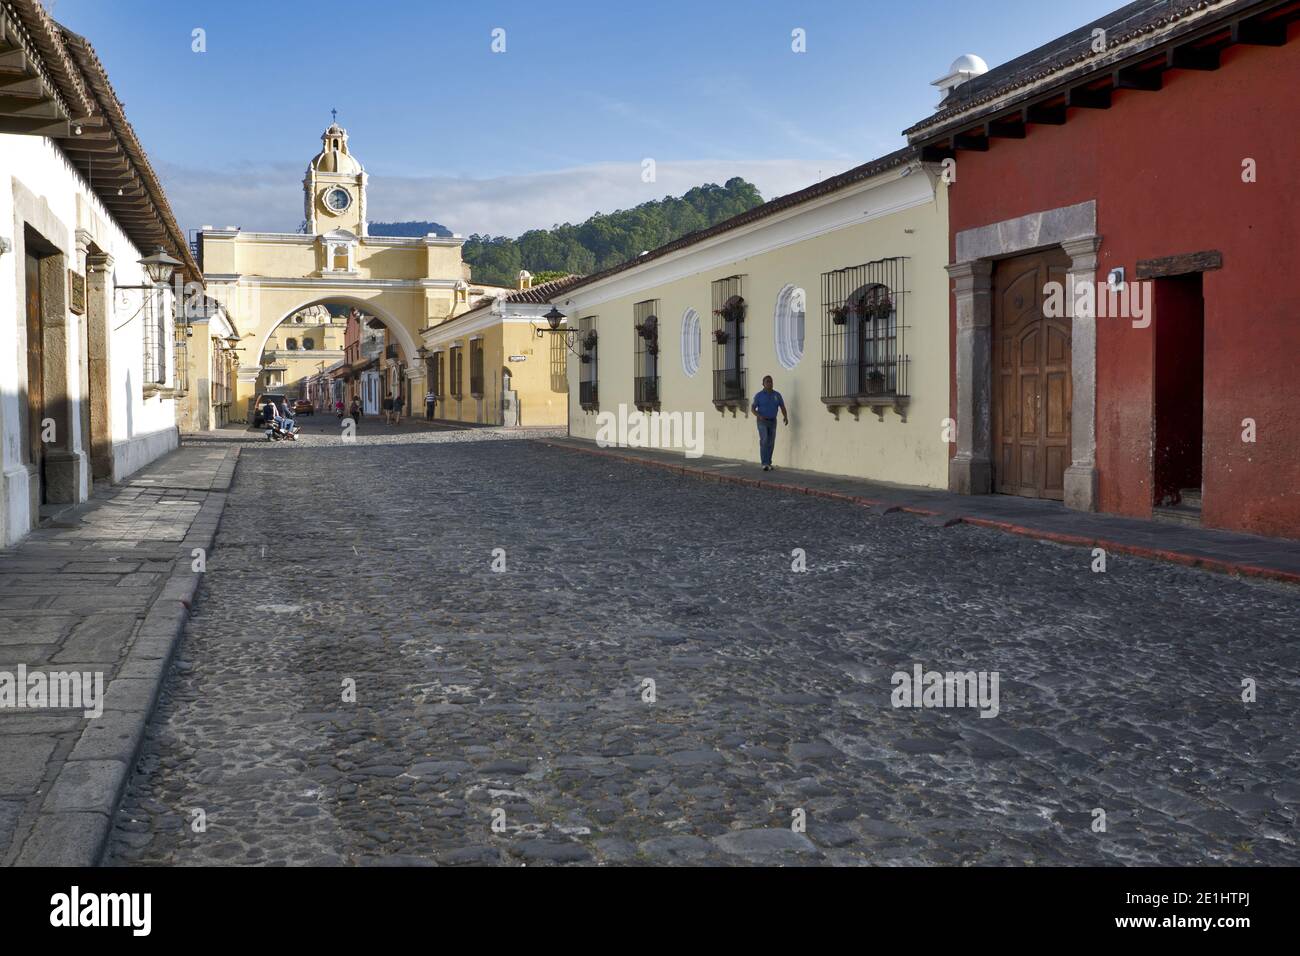 Antigua, Guatemala, Central America: Agua volcano behind yellow Santa Catalina Arch, colonial town and UNESCO World Heritage Site Stock Photo